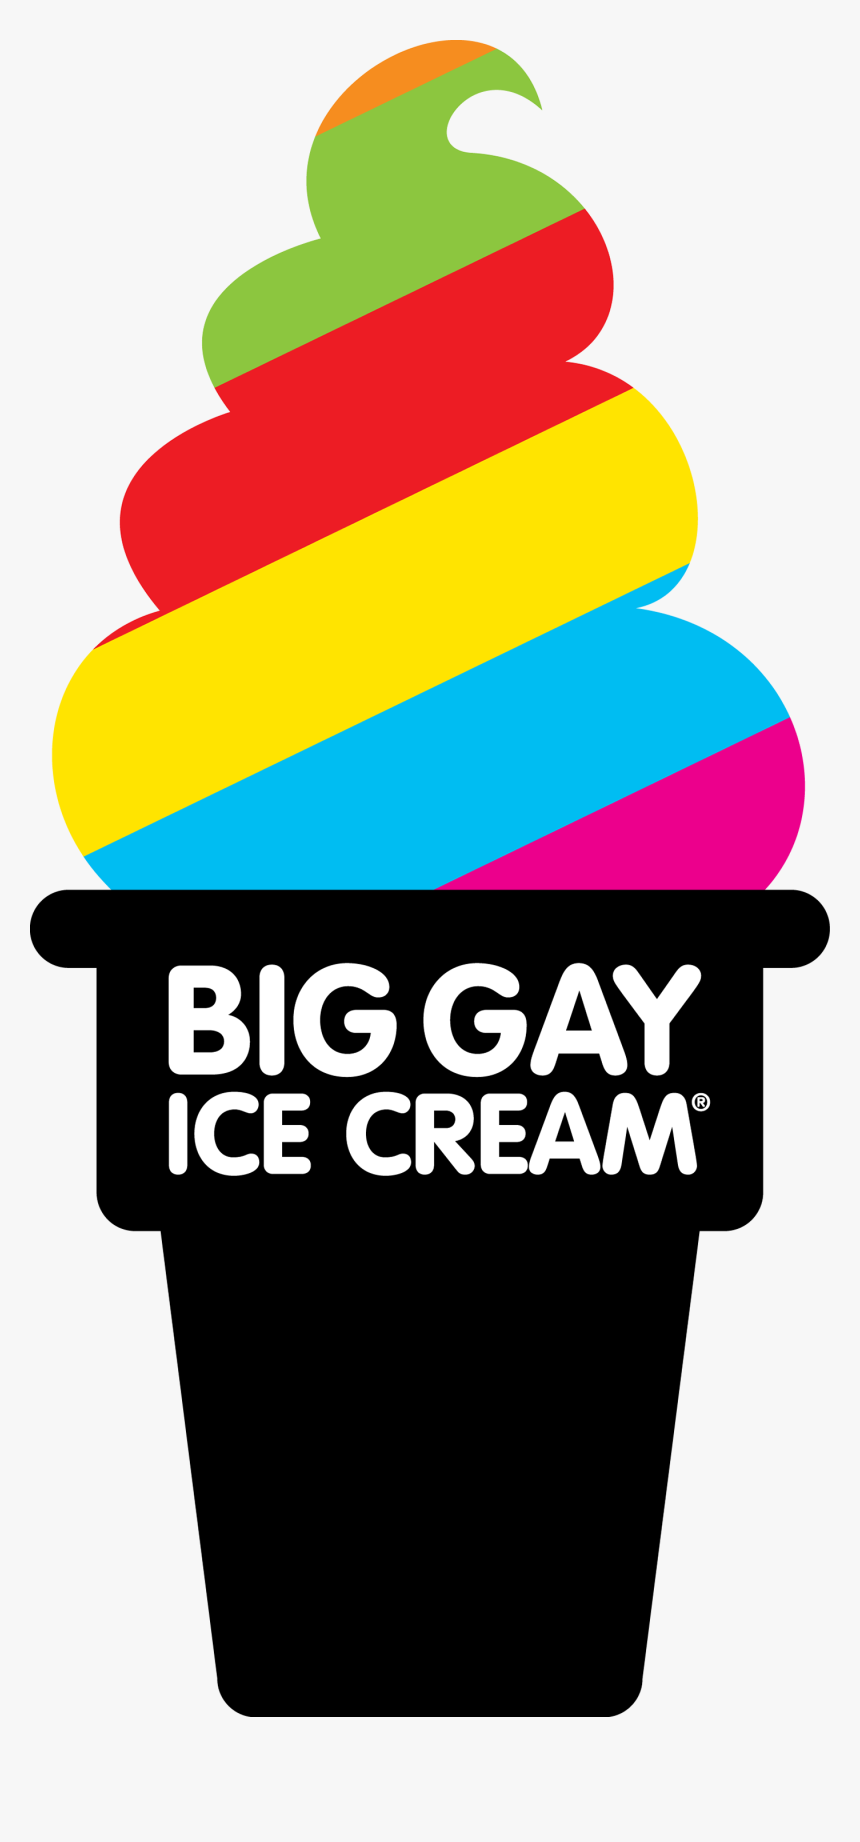 Transparent Ice Cream Shop Clipart - Big Gay Ice Cream Logo Transparent, HD Png Download, Free Download